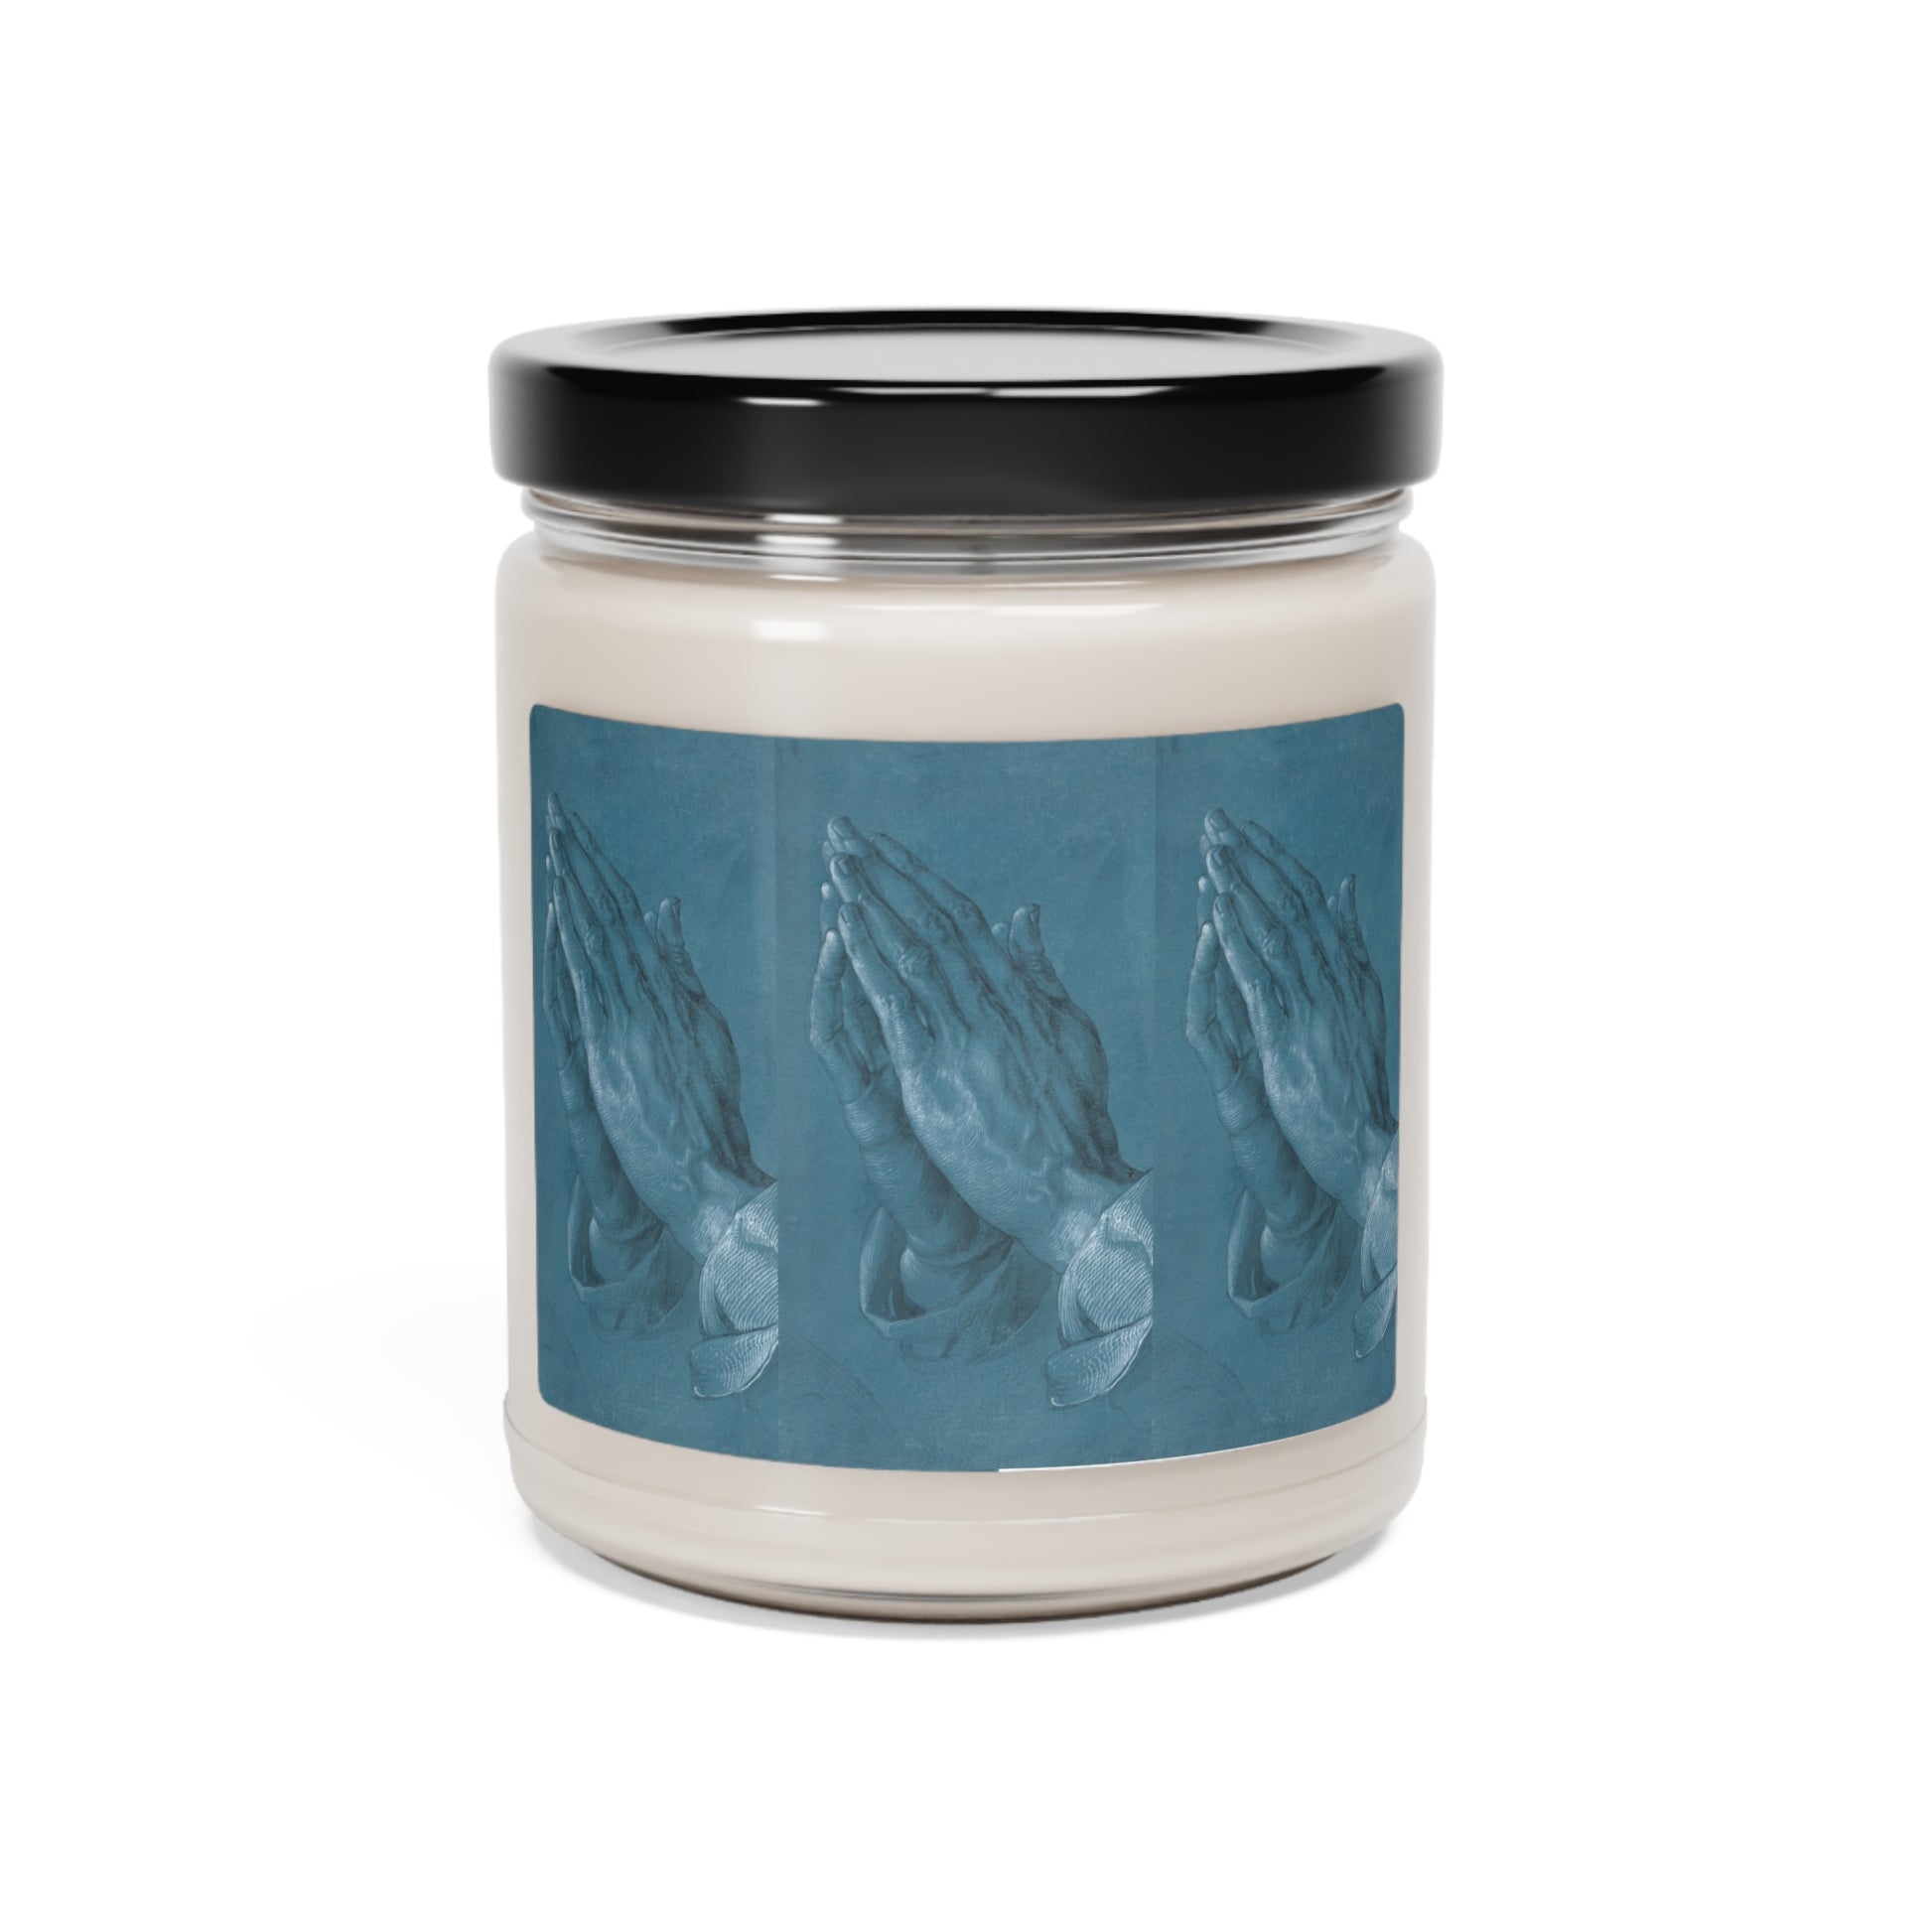 a candle with a picture of hands on it